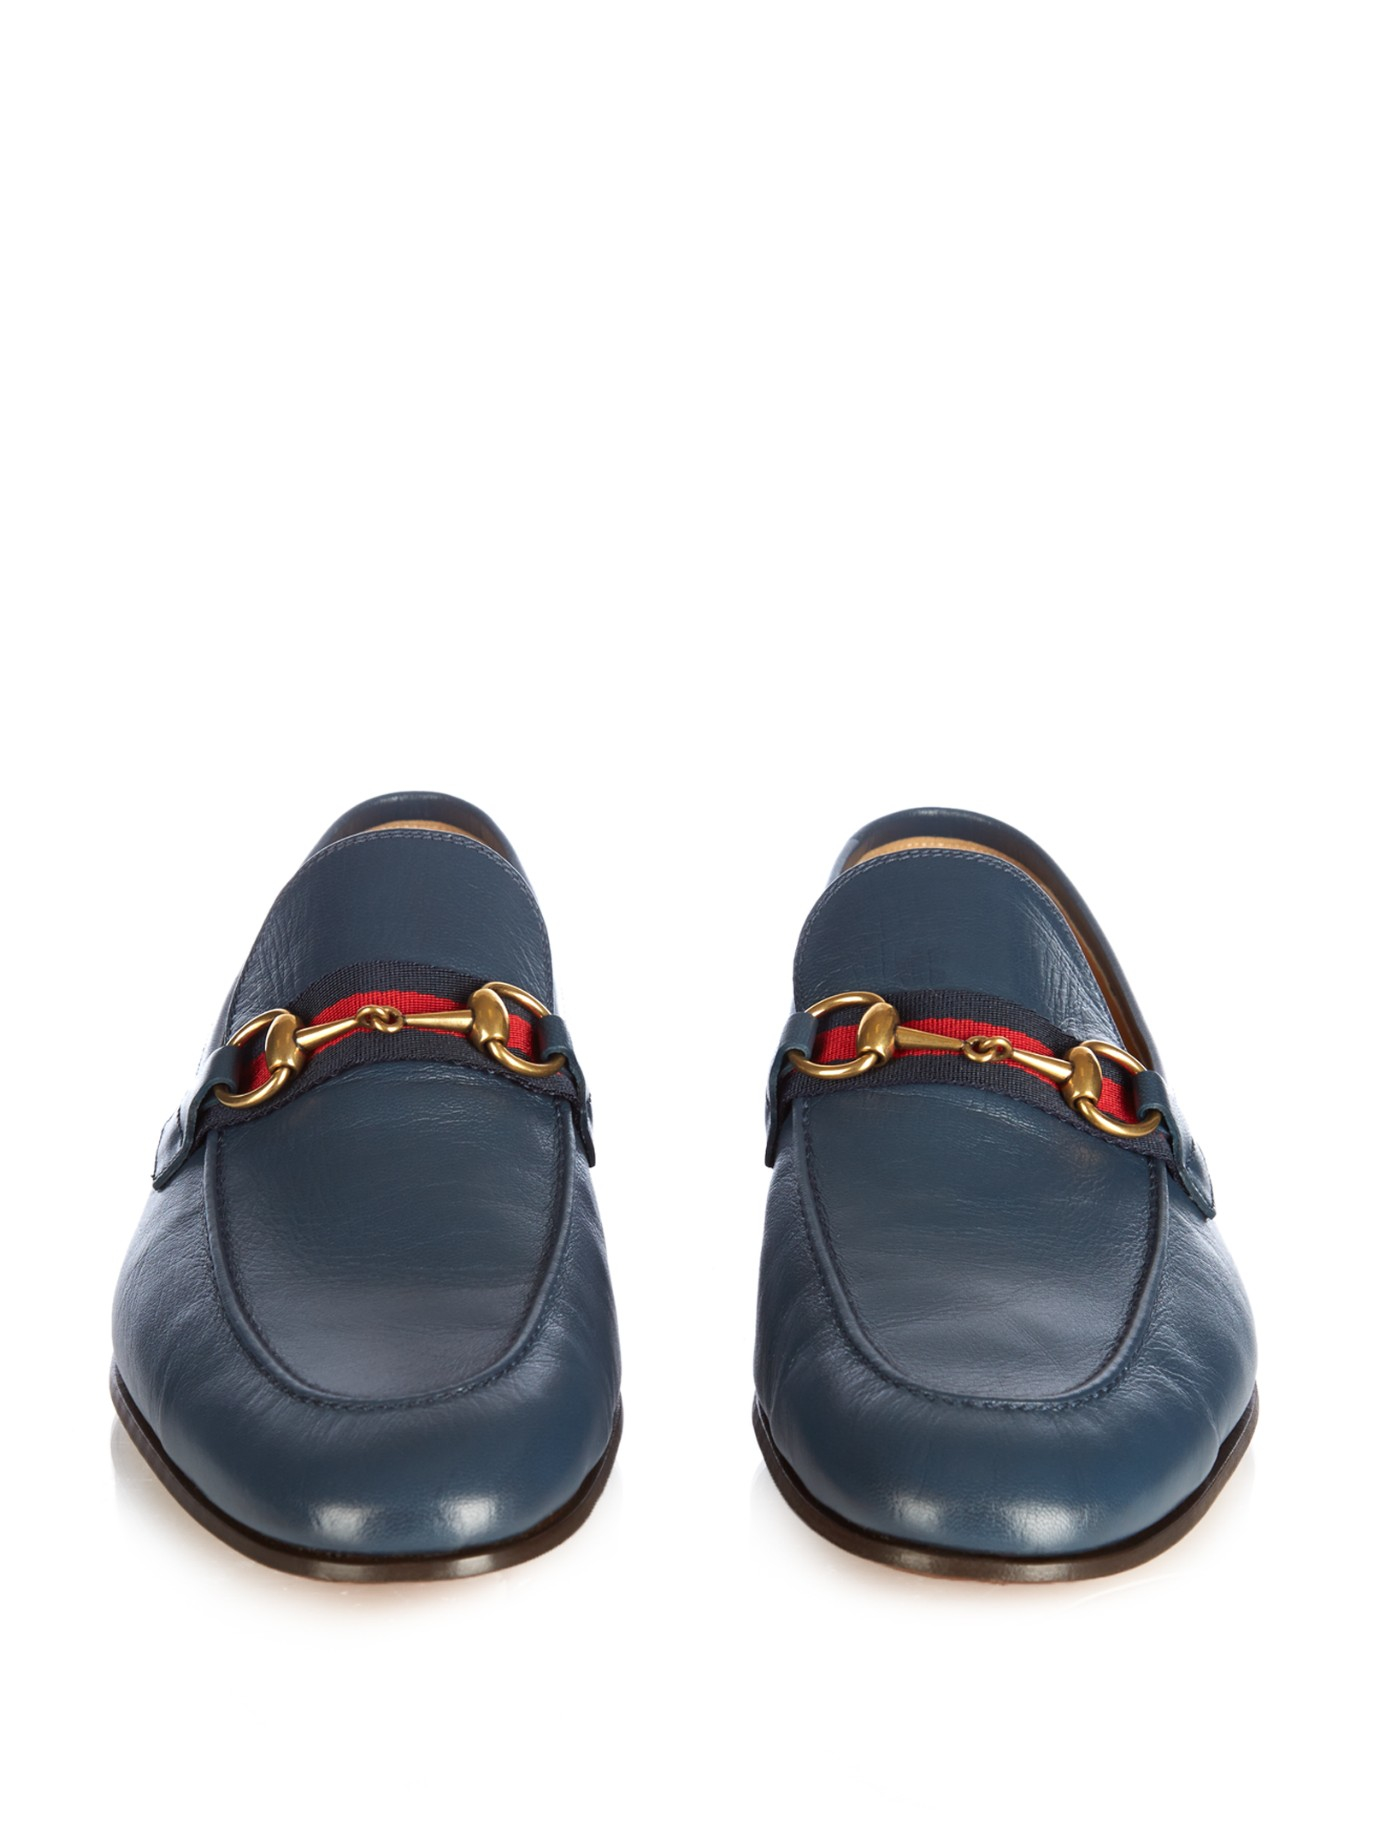 Lyst - Gucci Horsebit Leather Loafers in Blue for Men